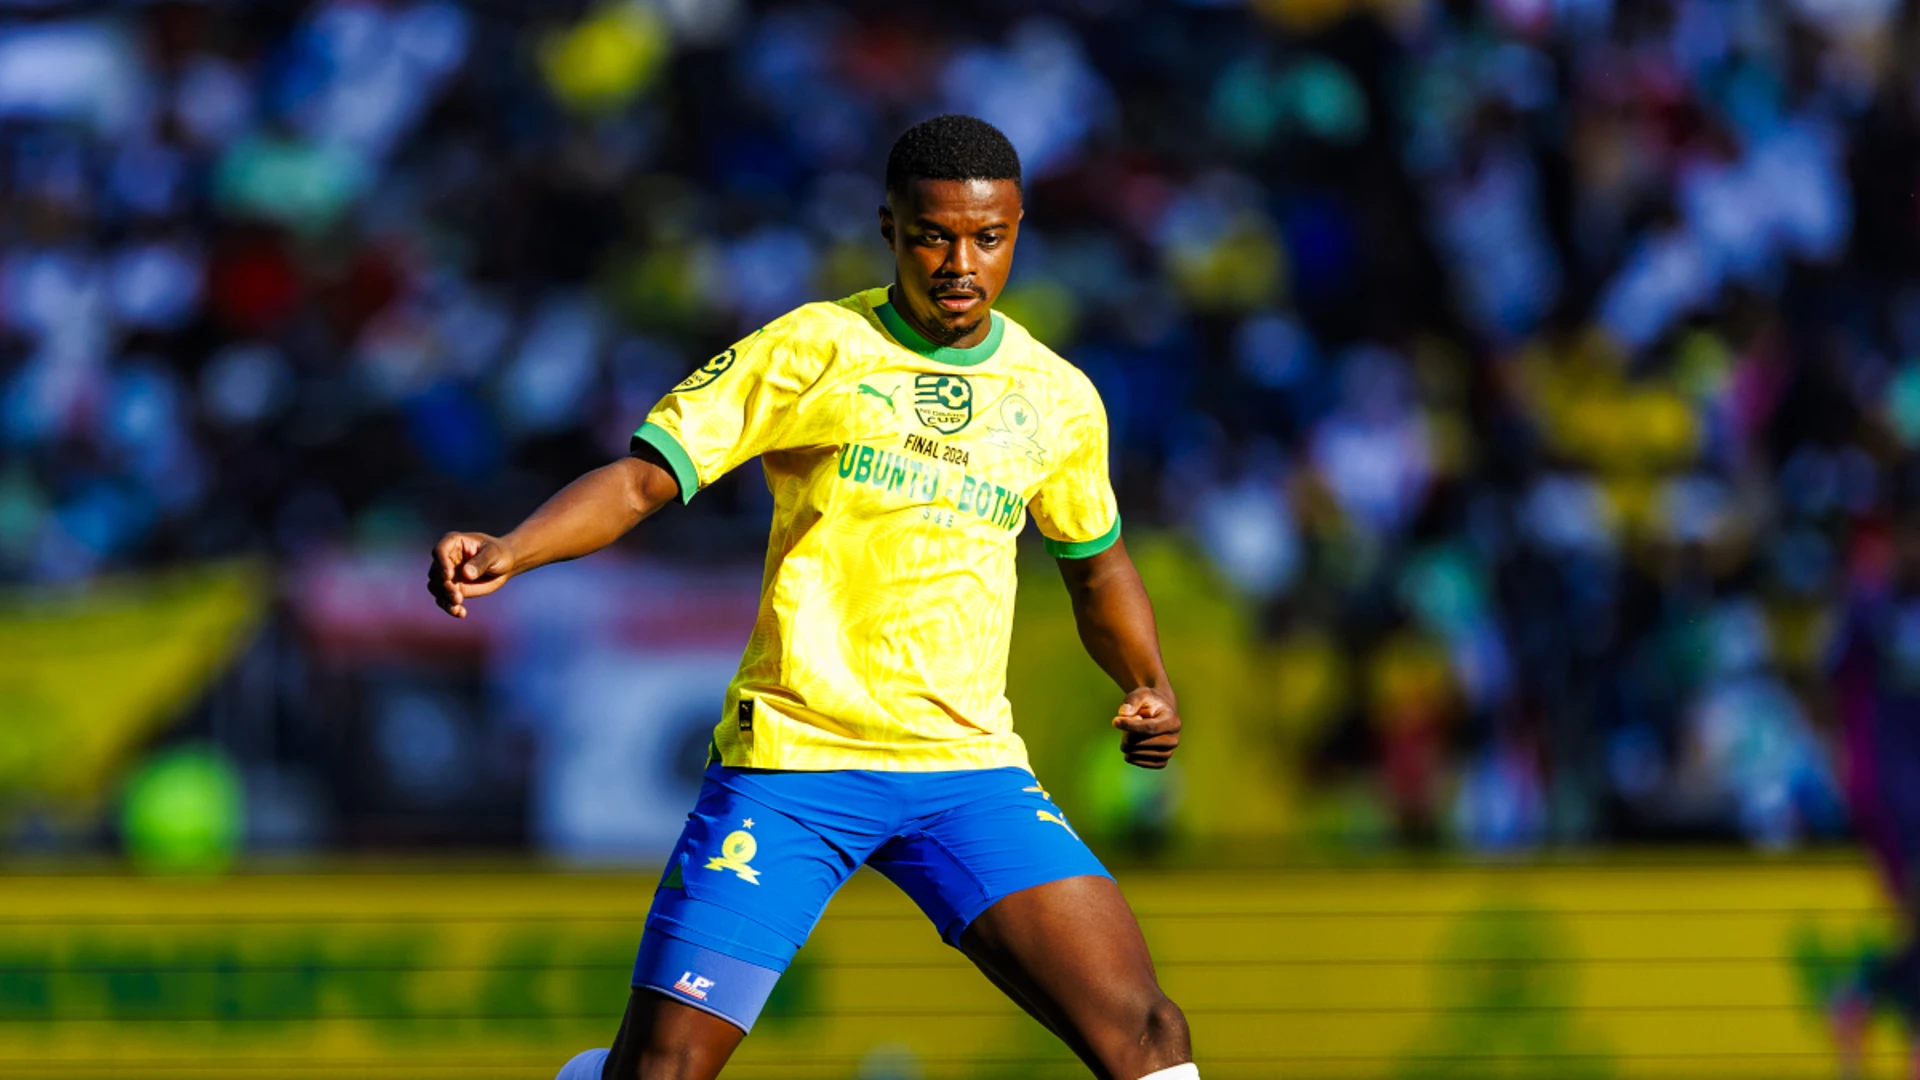 Sundowns ‘played well’ making defeat bittersweet says coach